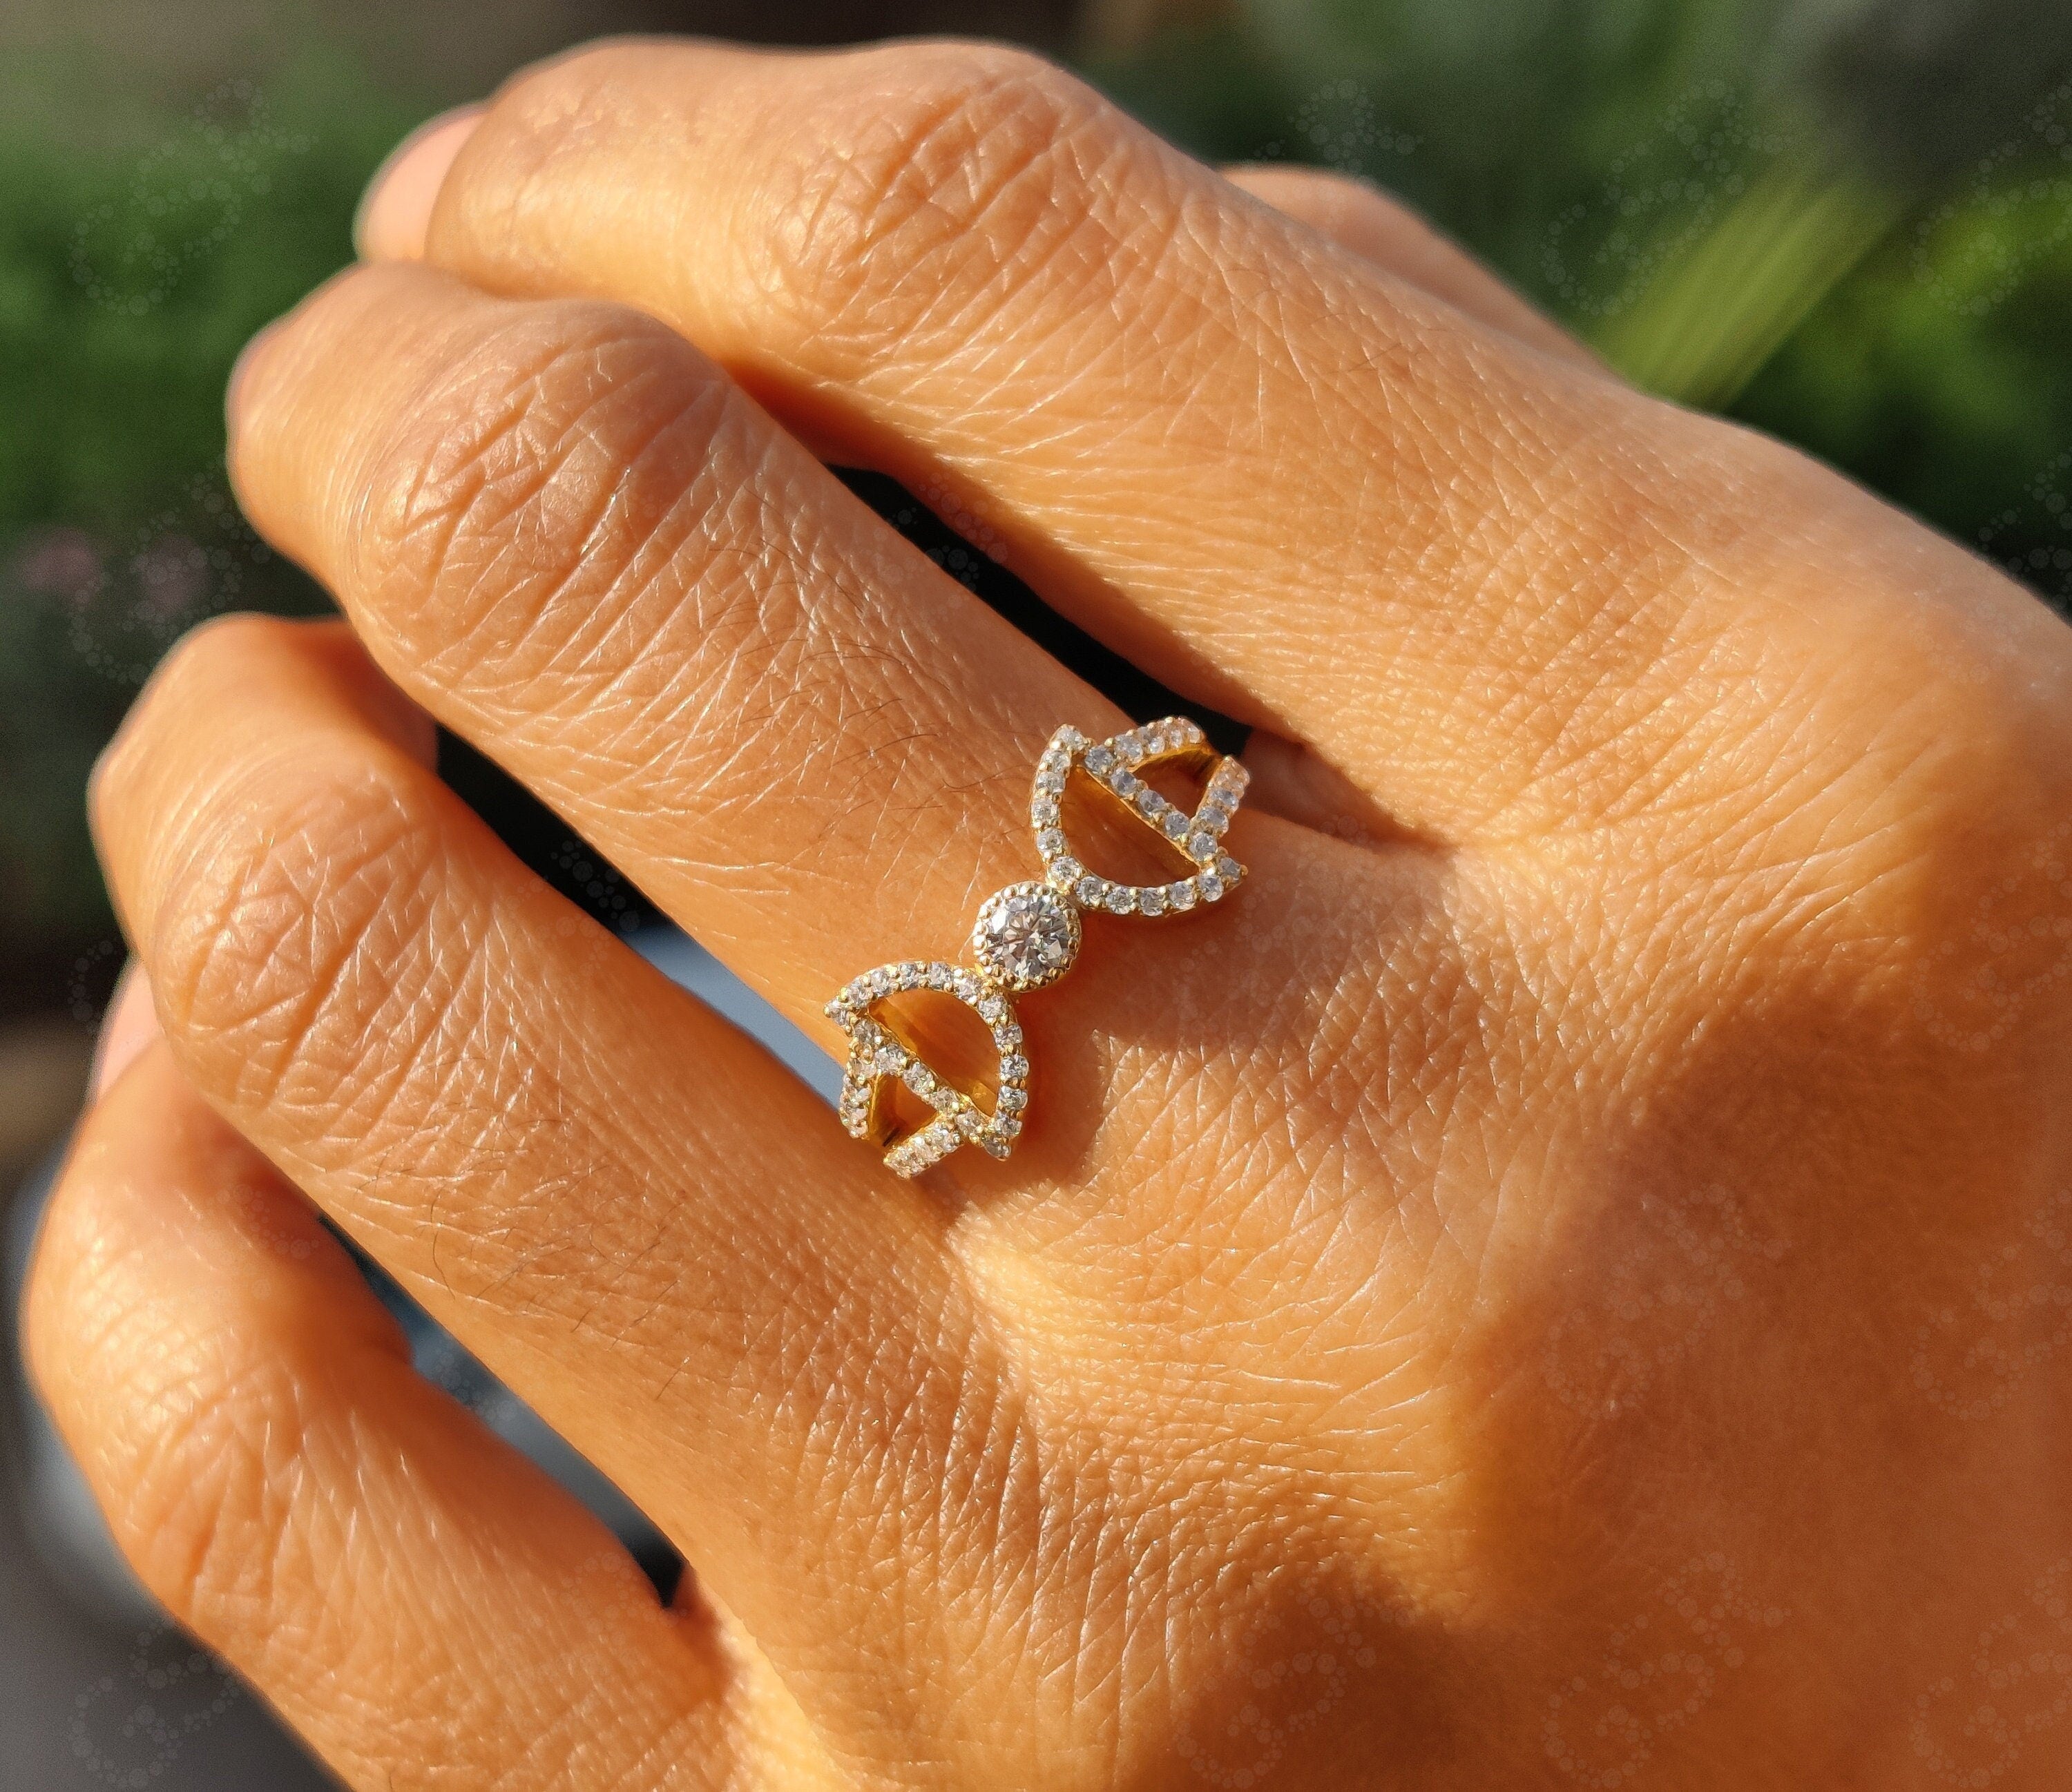 Unique Geometric Beauty: Silver and Solid Gold Moissanite Ring, a Dainty Minimalist Stackable Ring and a Delightful Choice for Women